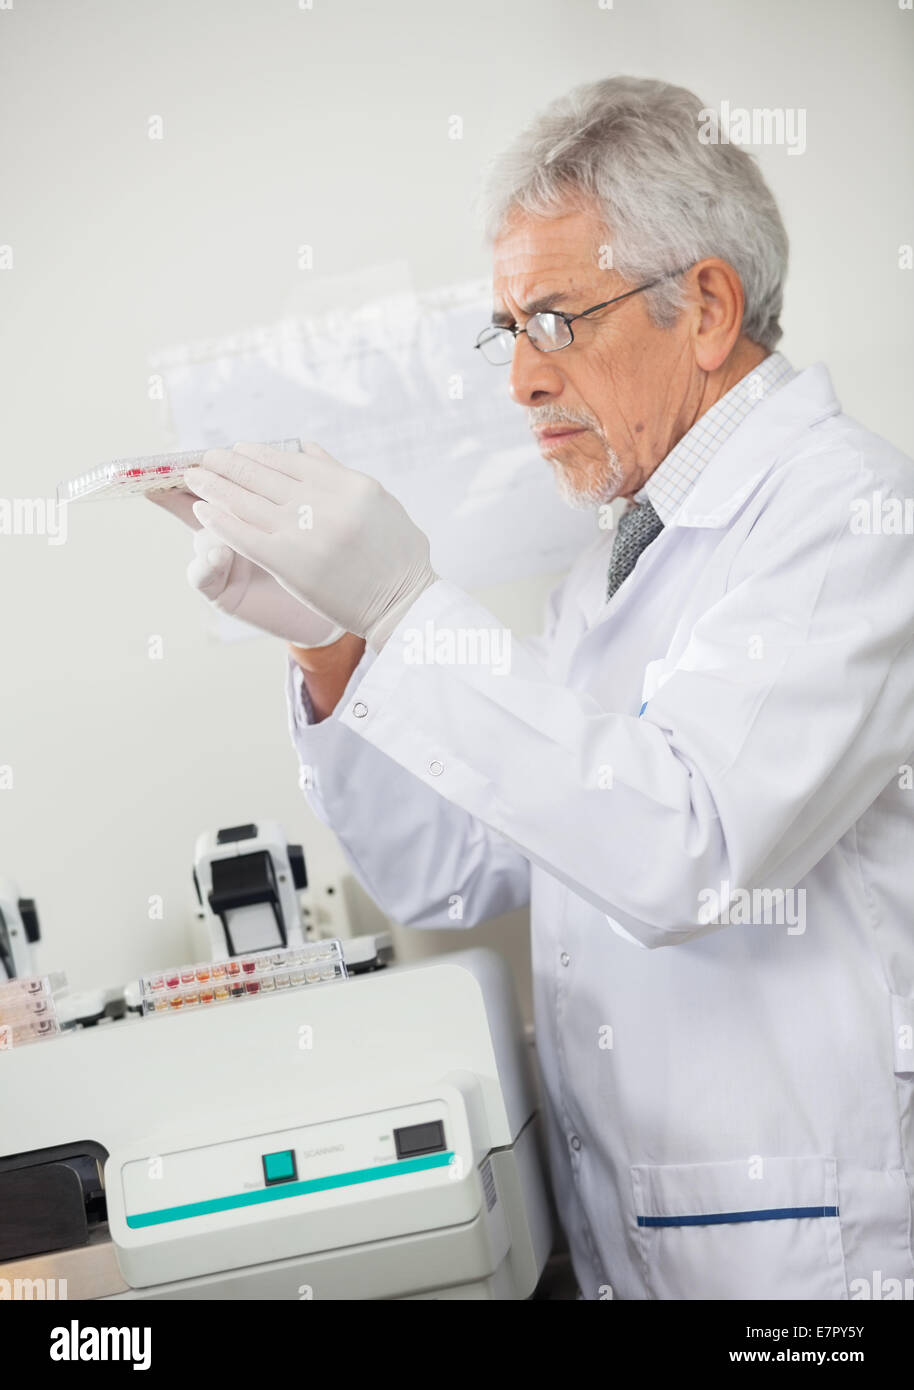 Scientist Examining Microplate Stock Photo